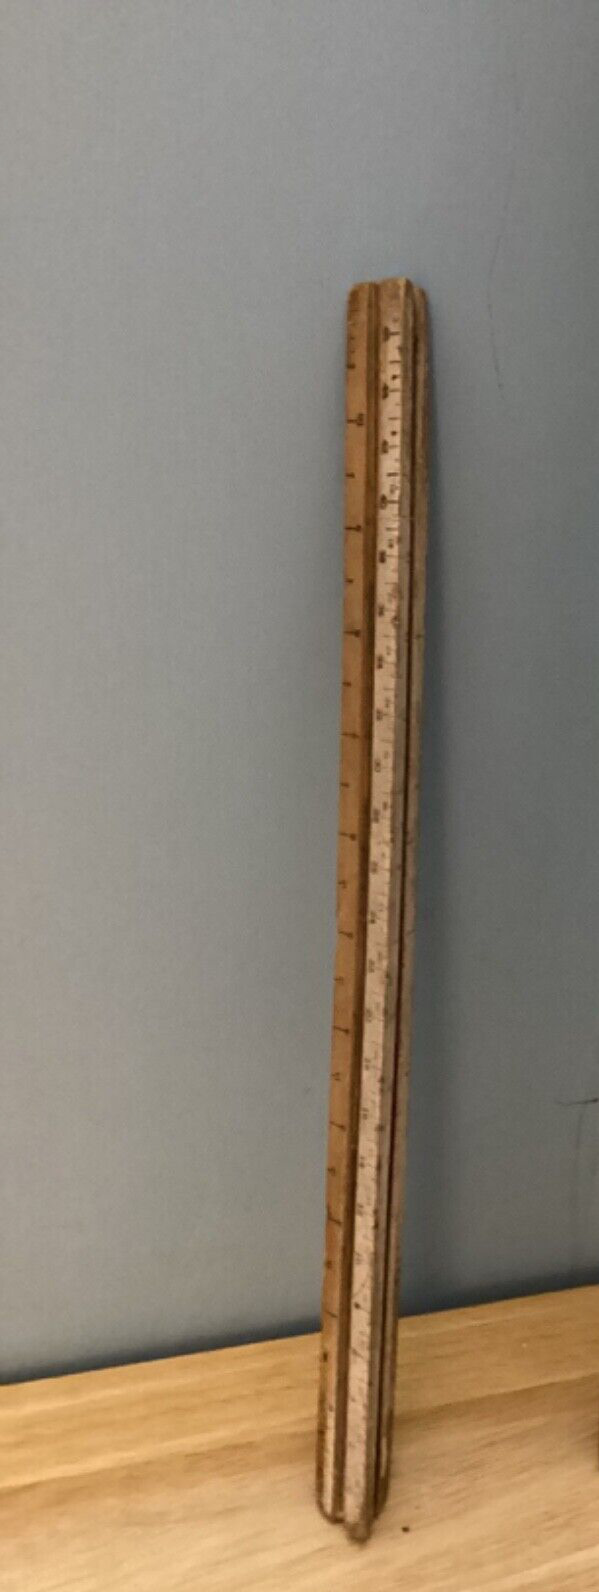 Vintage Wooden 3-Sided Triangular Scale Ruler